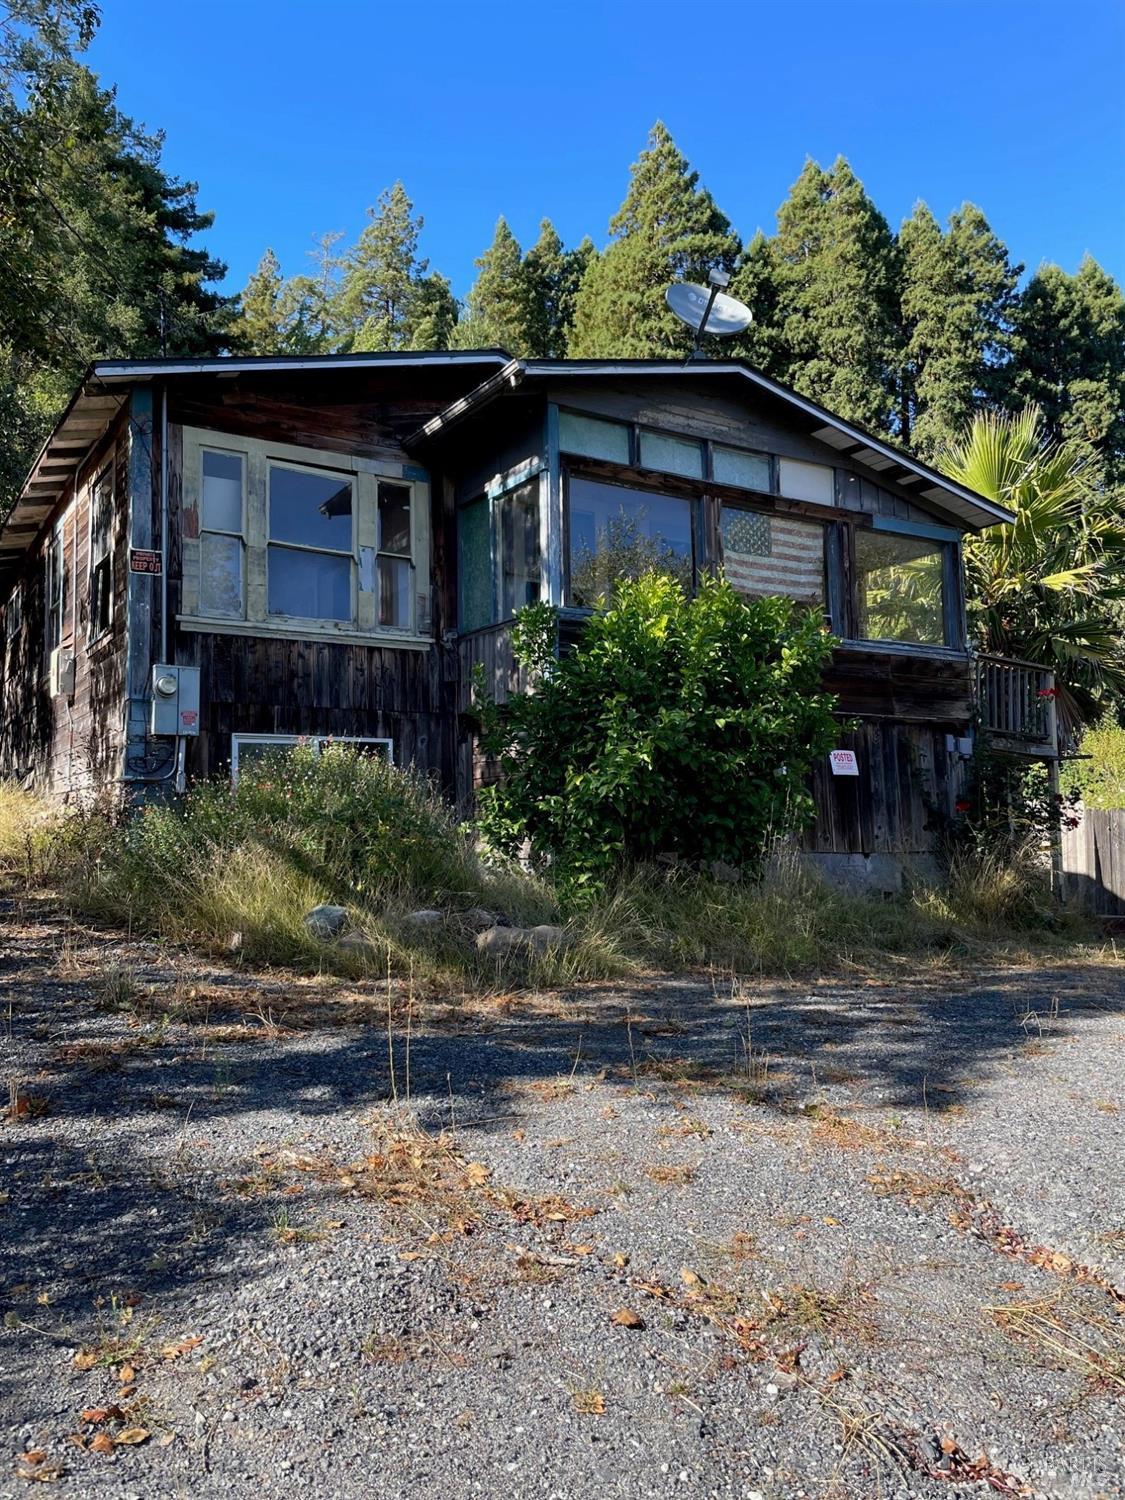 Built in 1916, Spring feed water source. just  under 1/2 acre. Two bed one bath . Views, solar. First time on market since 1977.Court approved probate sale. Major Fixer.